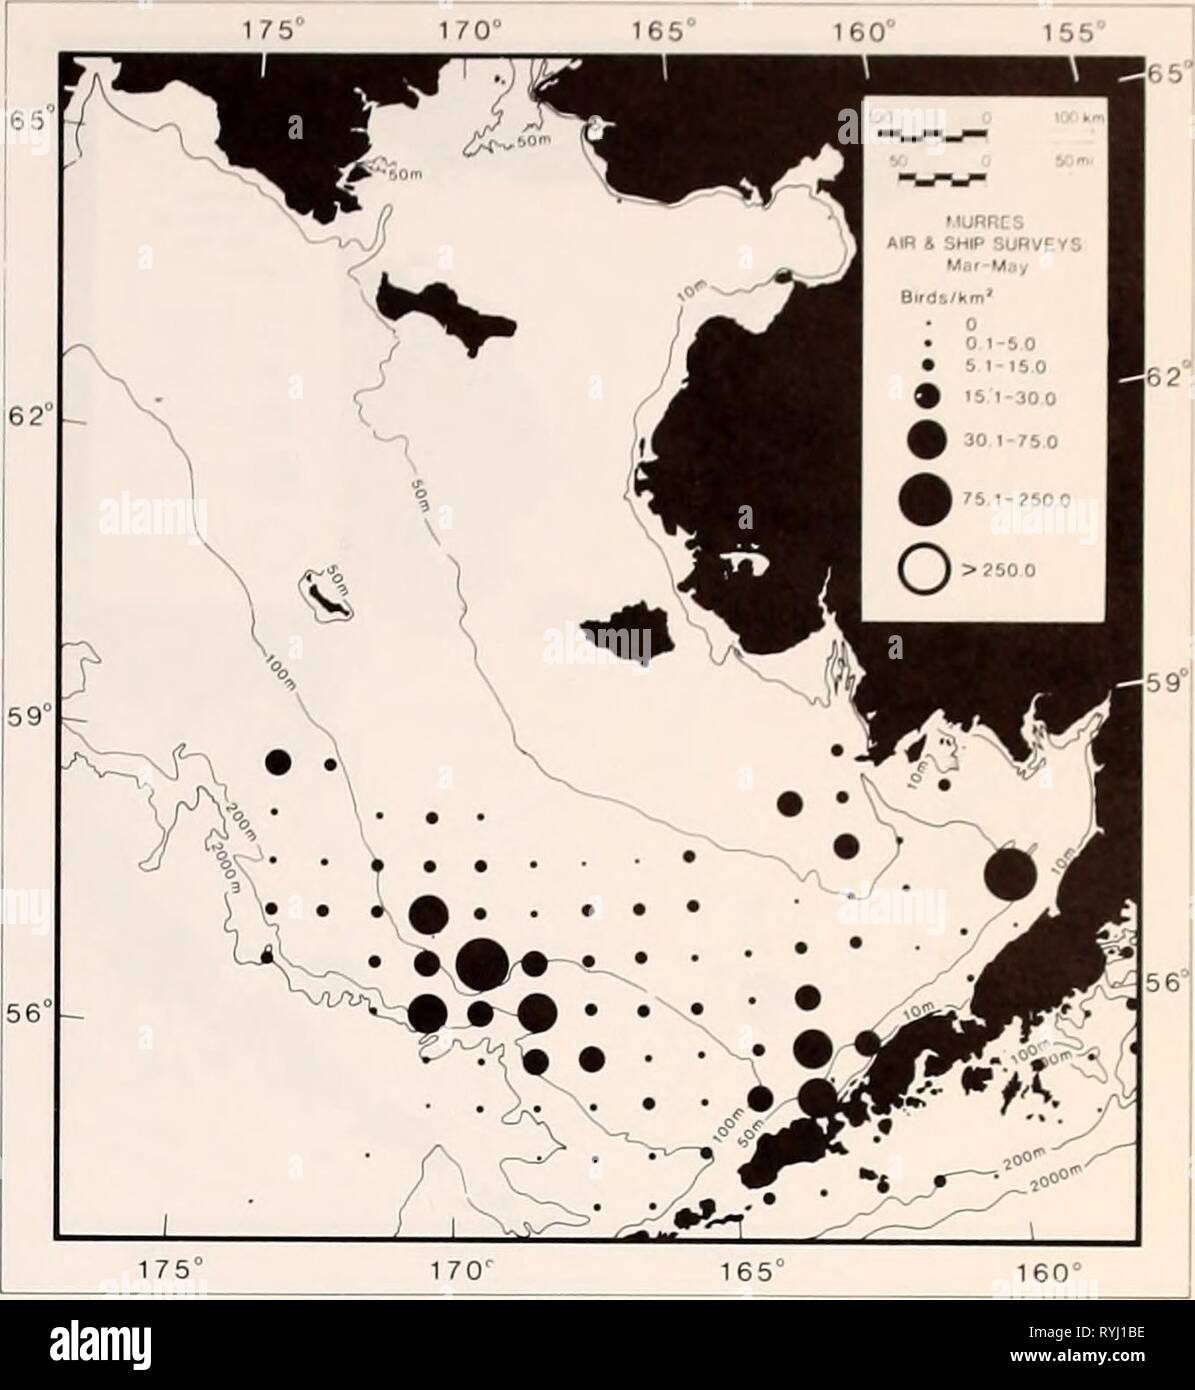 The Eastern Bering Sea Shelf : oceanography and resources / edited by Donald W. Hood and John A. Calder  easternberingsea00hood Year: 1981  Pelagic clislrihution 705 offshore. This notion is consistent with Swartz's (1966) findings on food habits. Since Common and Thick-billed Murres are diffi- cult to tell apart in the field, particularly from air- craft, the data for the two species have been com- bined in this chapter. Likewise, aerial and shipboard surveys are combined to provide the most compre- hensive distributional patterns. Both survey types tend to underestimate murre densities, and  Stock Photo